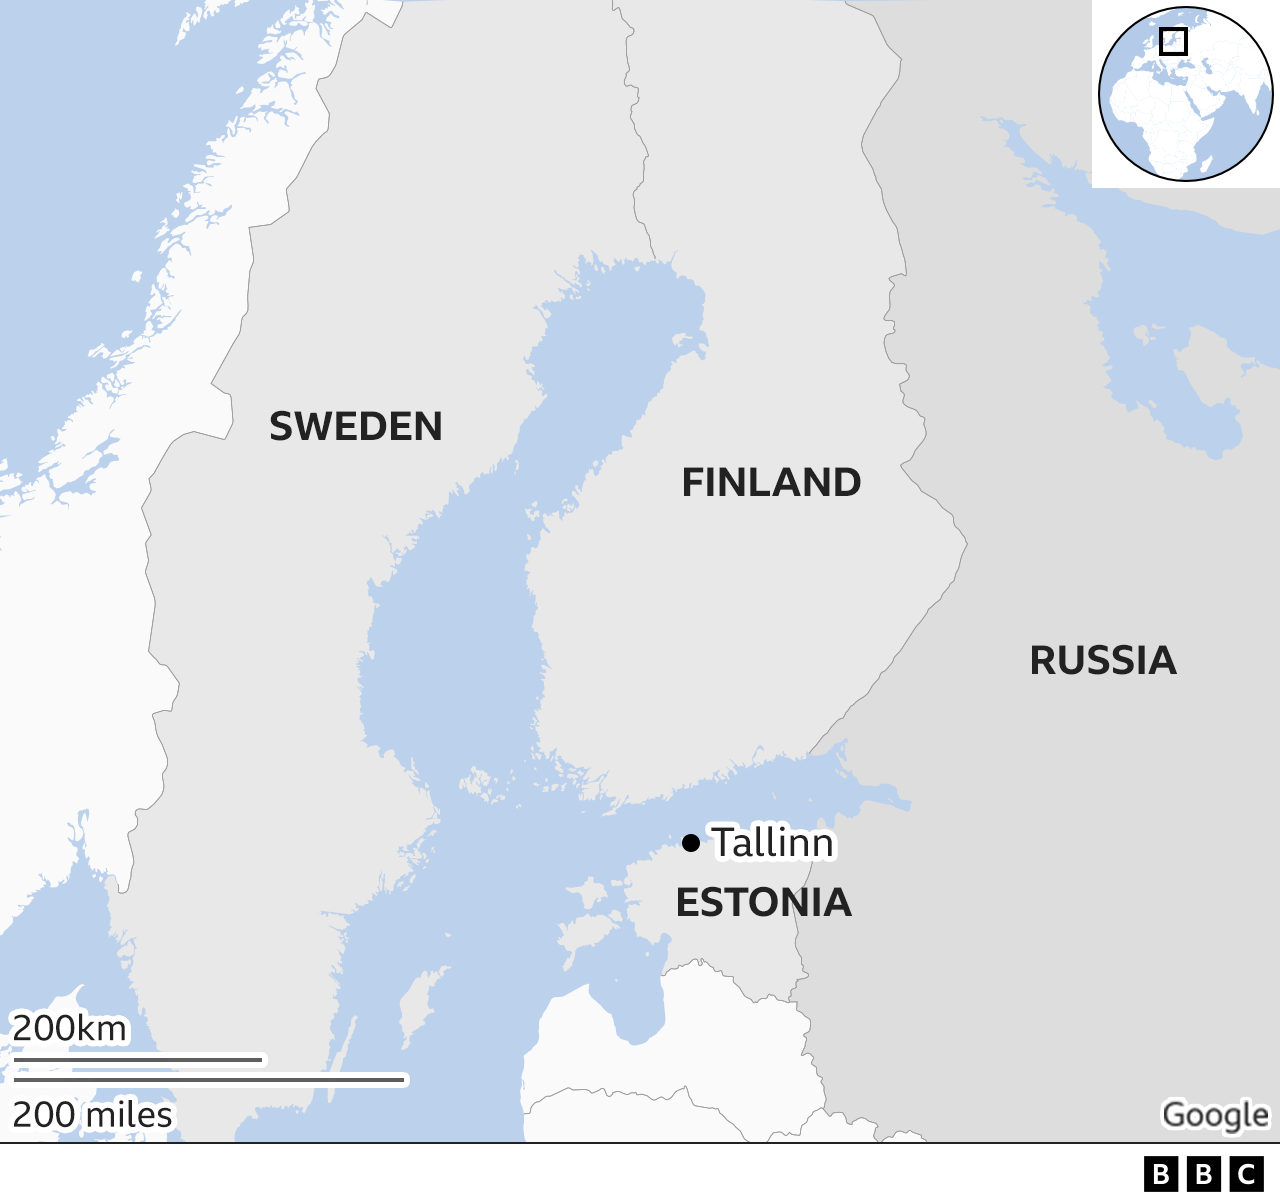 Map showing Estonia, Russia, Finland and Sweden